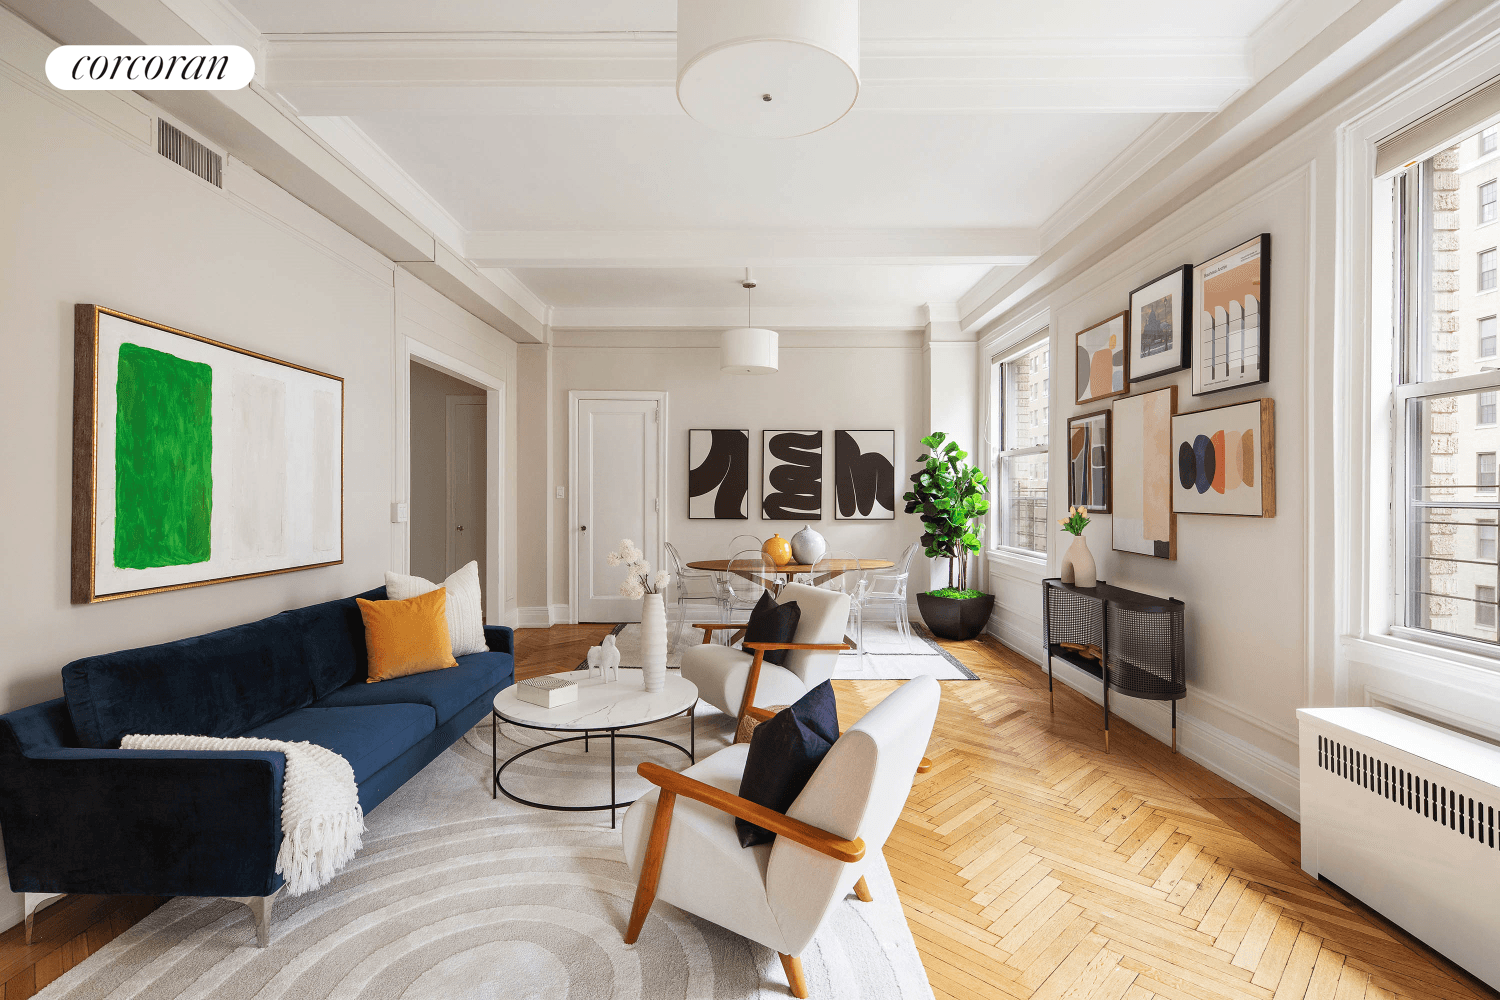 Now available for sale is one of the rarest classic apartment floor plans in New York City an Edwardian 5 that has been appropriated and transformed into a highly functional ...